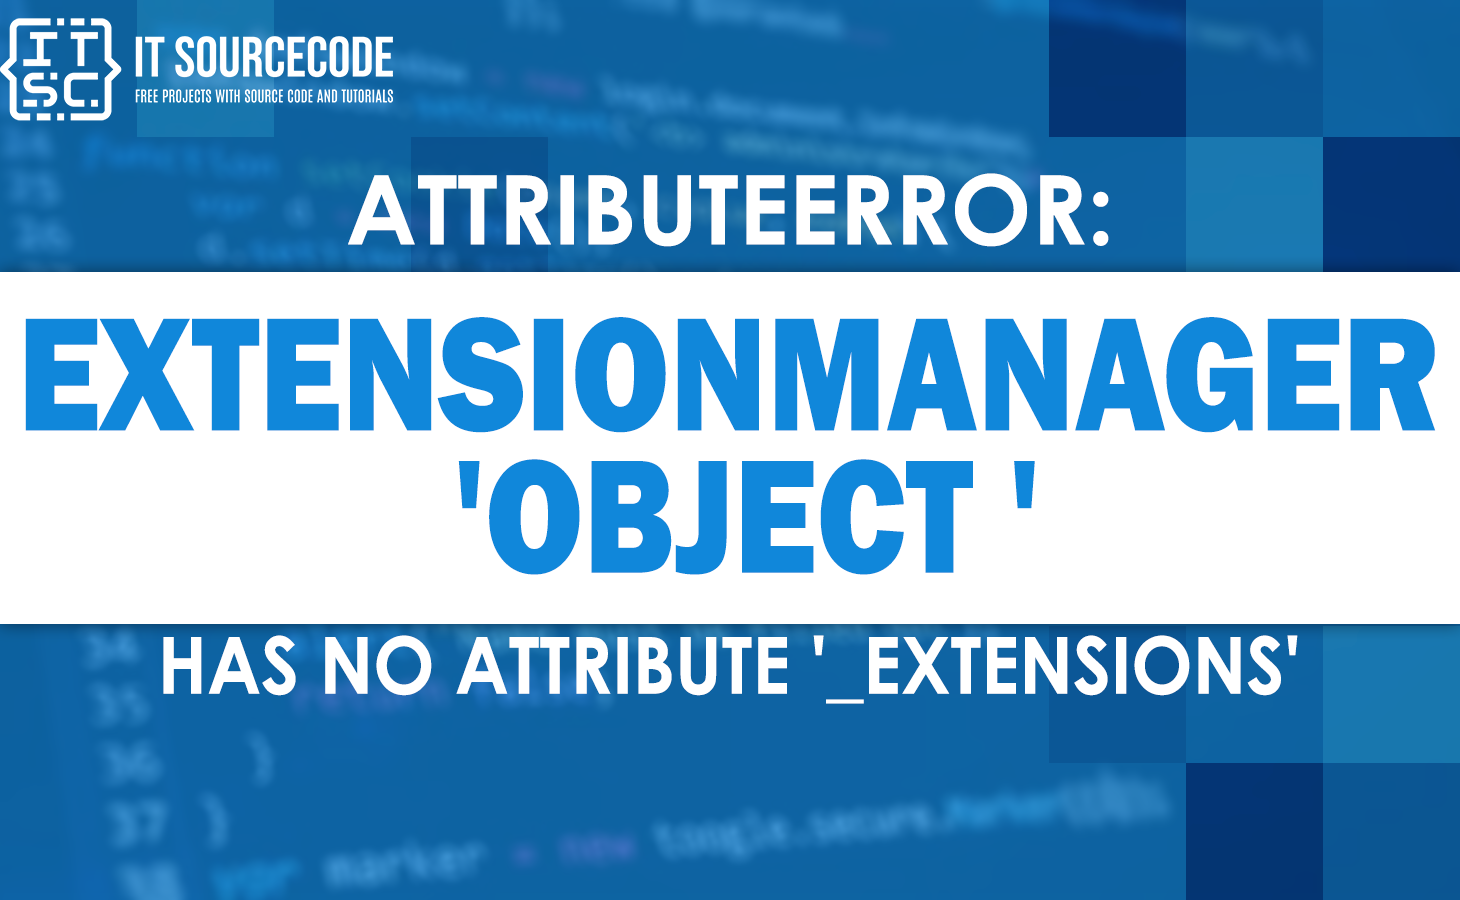 attributeerror extensionmanager object has no attribute _extensions